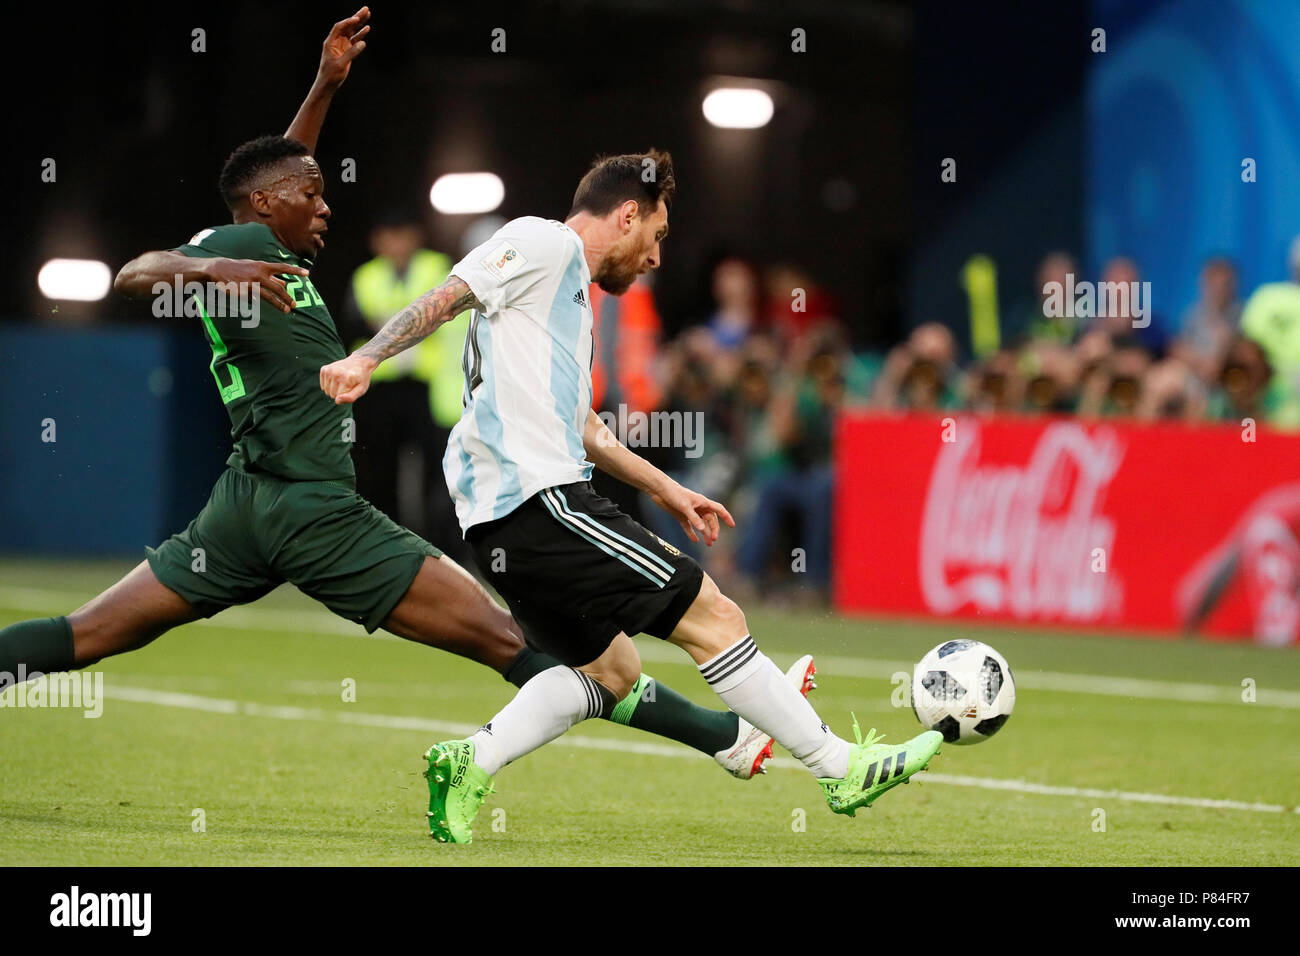 SAINT PETERSBURG, RUSSIA - JUNE 26: Lionel Messi (R) of Argentina national team shoots to score a goal as Kenneth Omeruo of Nigeria national team defends during the 2018 FIFA World Cup Russia group D match between Nigeria and Argentina at Saint Petersburg Stadium on June 26, 2018 in Saint Petersburg, Russia. (MB Media) Stock Photo